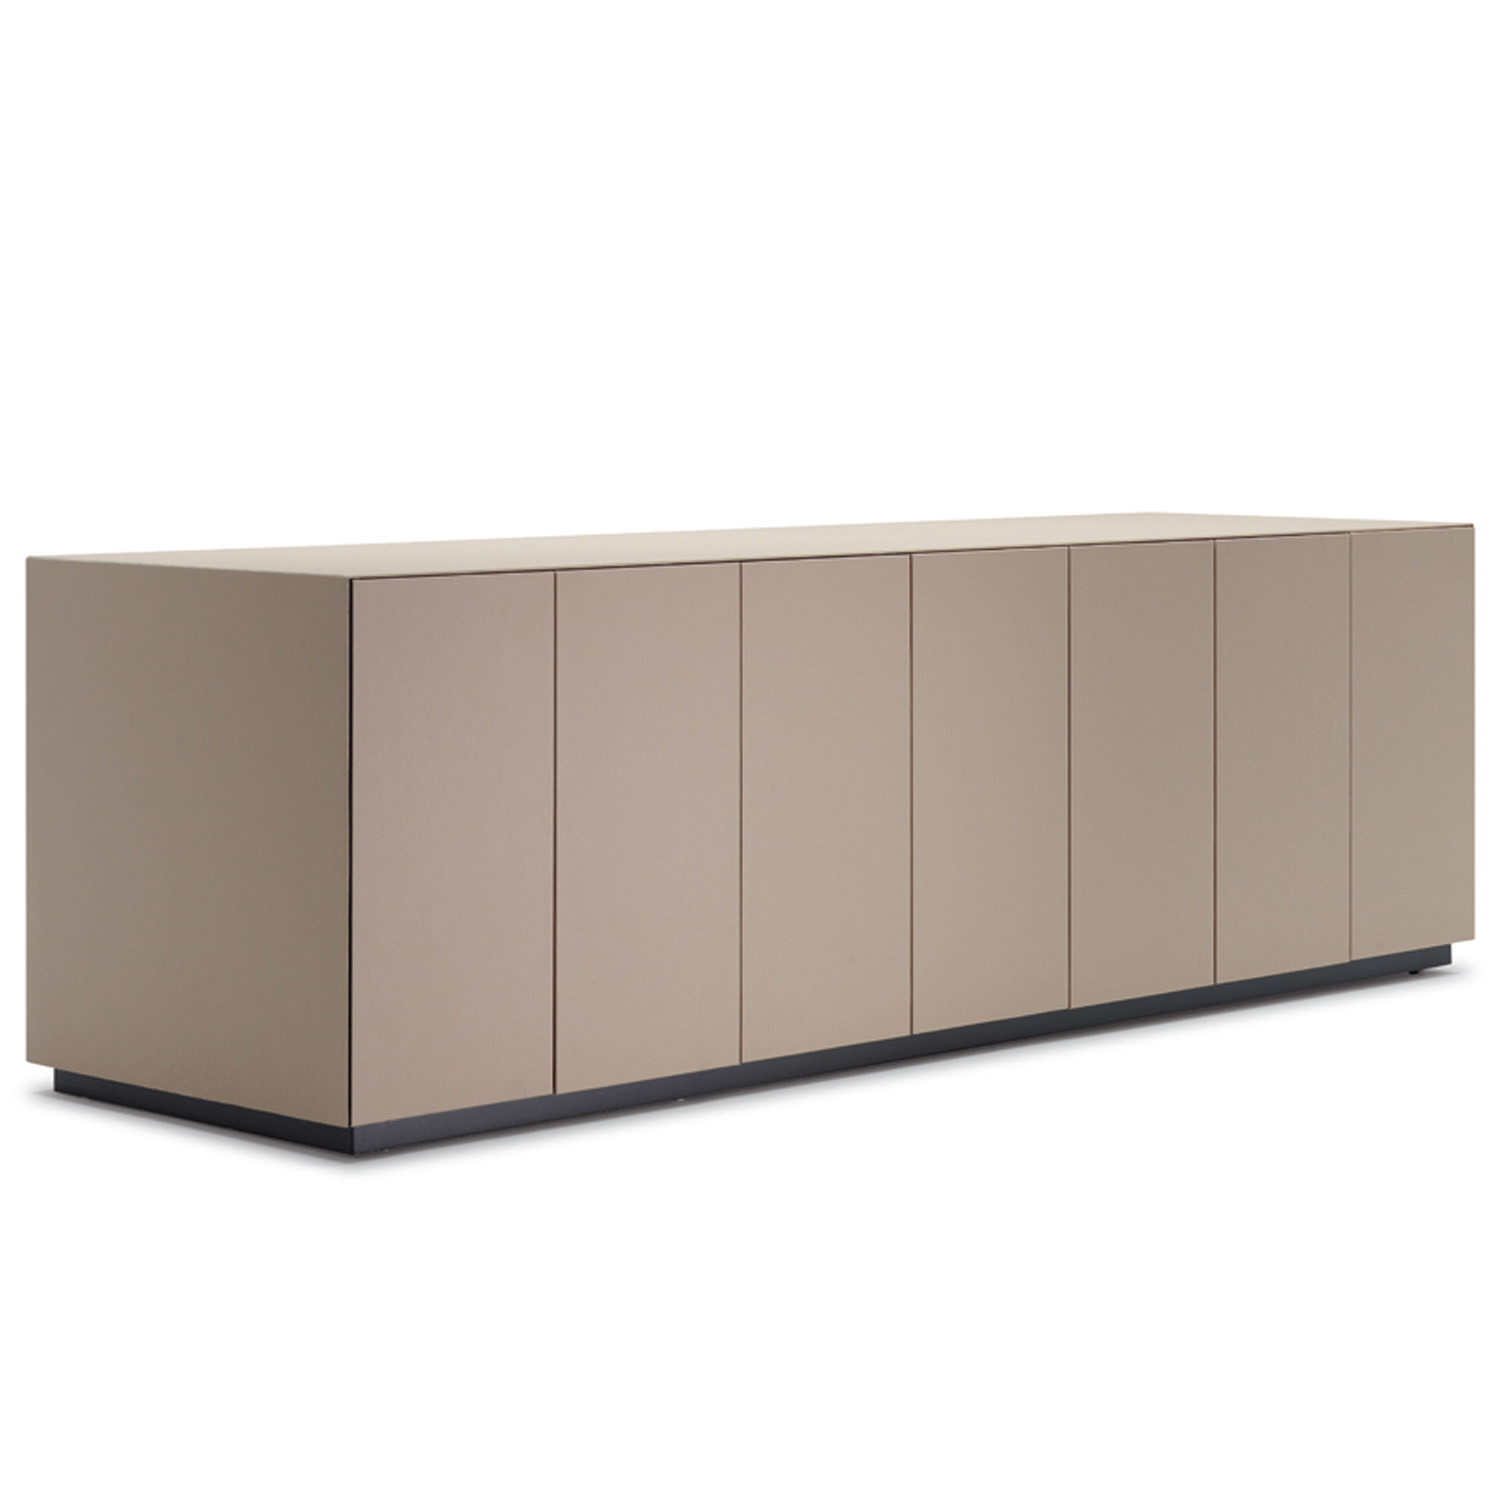 CEO Cube Office Storage | Office Storage Solutions | Apres Furniture